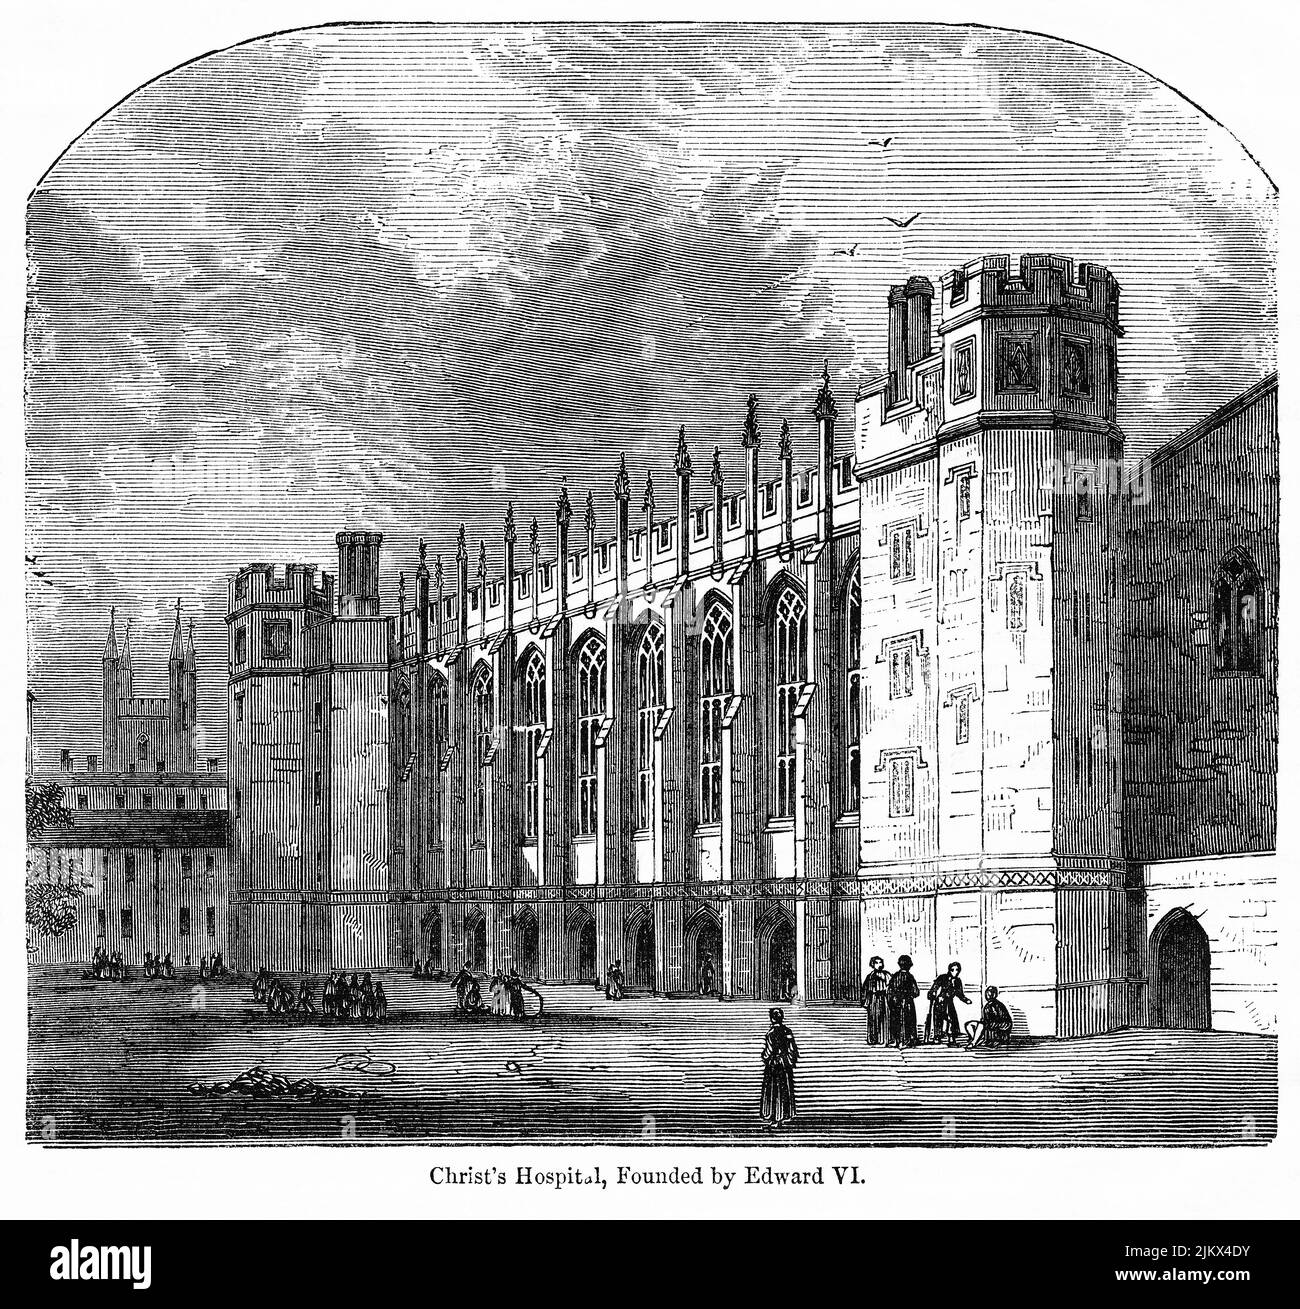 Christ's Hospital, founded by Edward VI, Illustration from the Book, 'John Cassel’s Illustrated History of England, Volume II', text by William Howitt, Cassell, Petter, and Galpin, London, 1858 Stock Photo